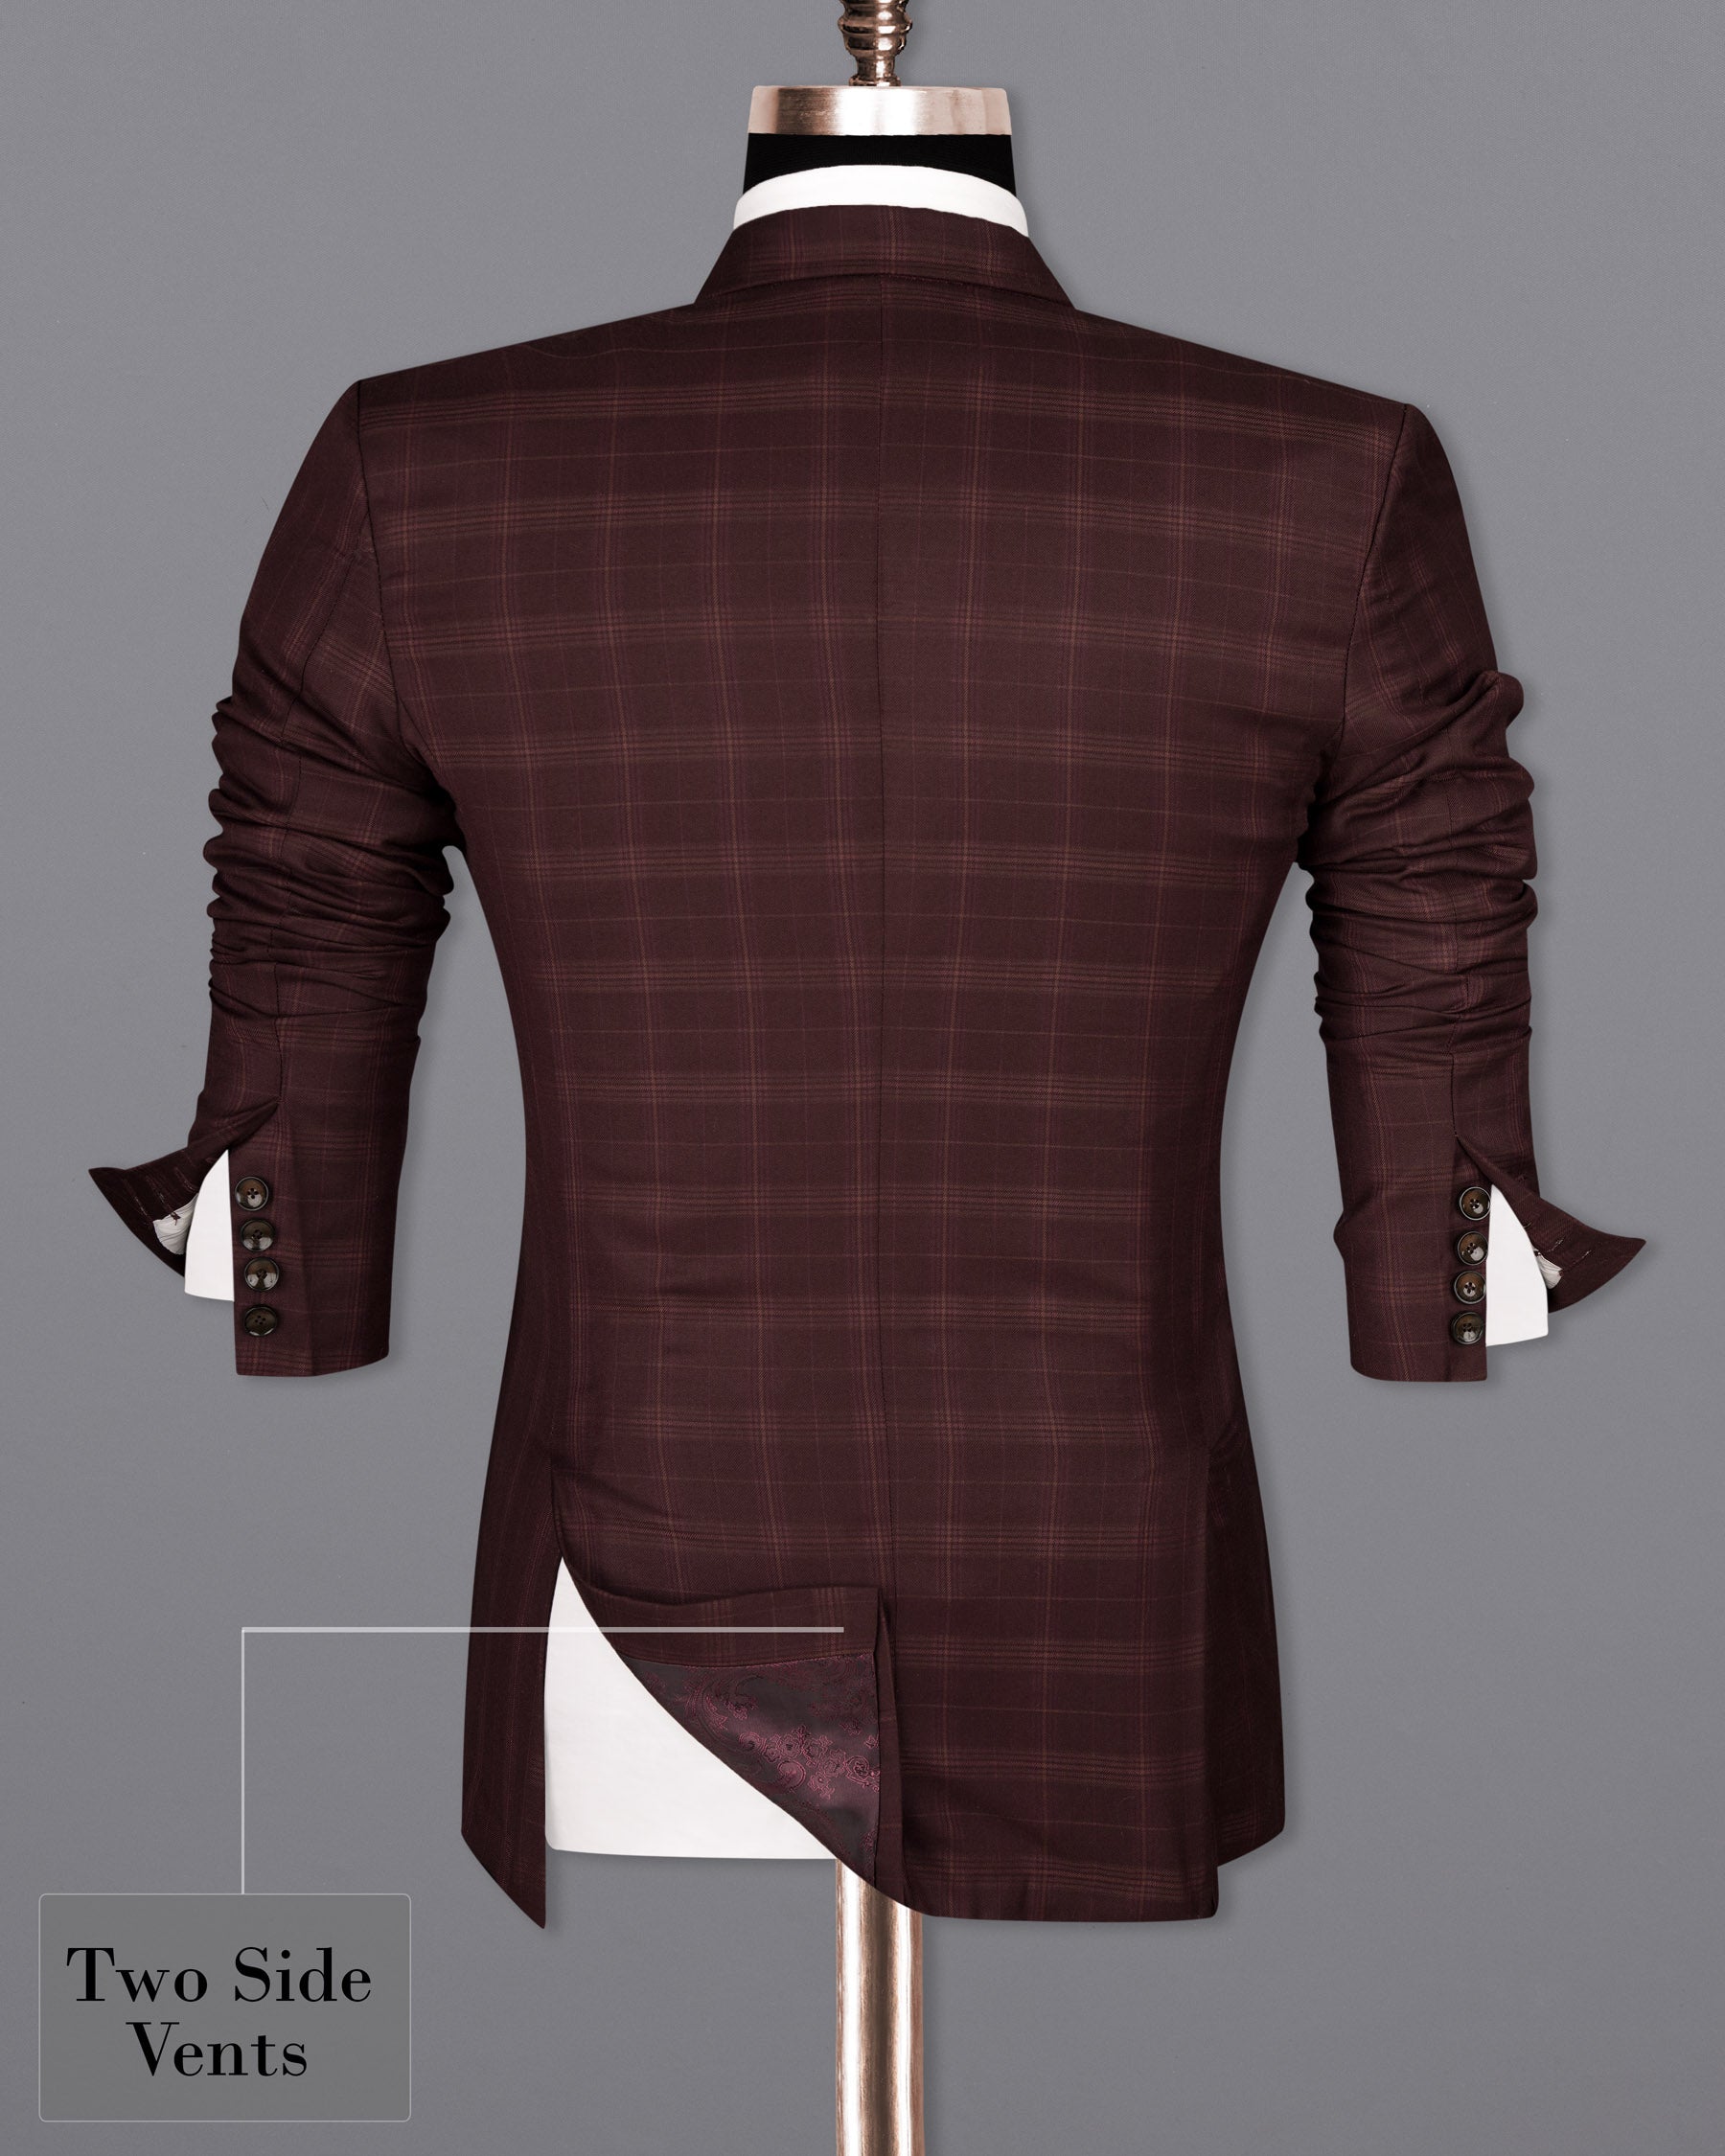 Crater Brown Super fine Plaid Double Breasted Wool Rich Blazer BL1607-DB-36, BL1607-DB-38, BL1607-DB-40, BL1607-DB-42, BL1607-DB-44, BL1607-DB-46, BL1607-DB-48, BL1607-DB-50, BL1607-DB-52, BL1607-DB-54, BL1607-DB-56, BL1607-DB-58, BL1607-DB-60